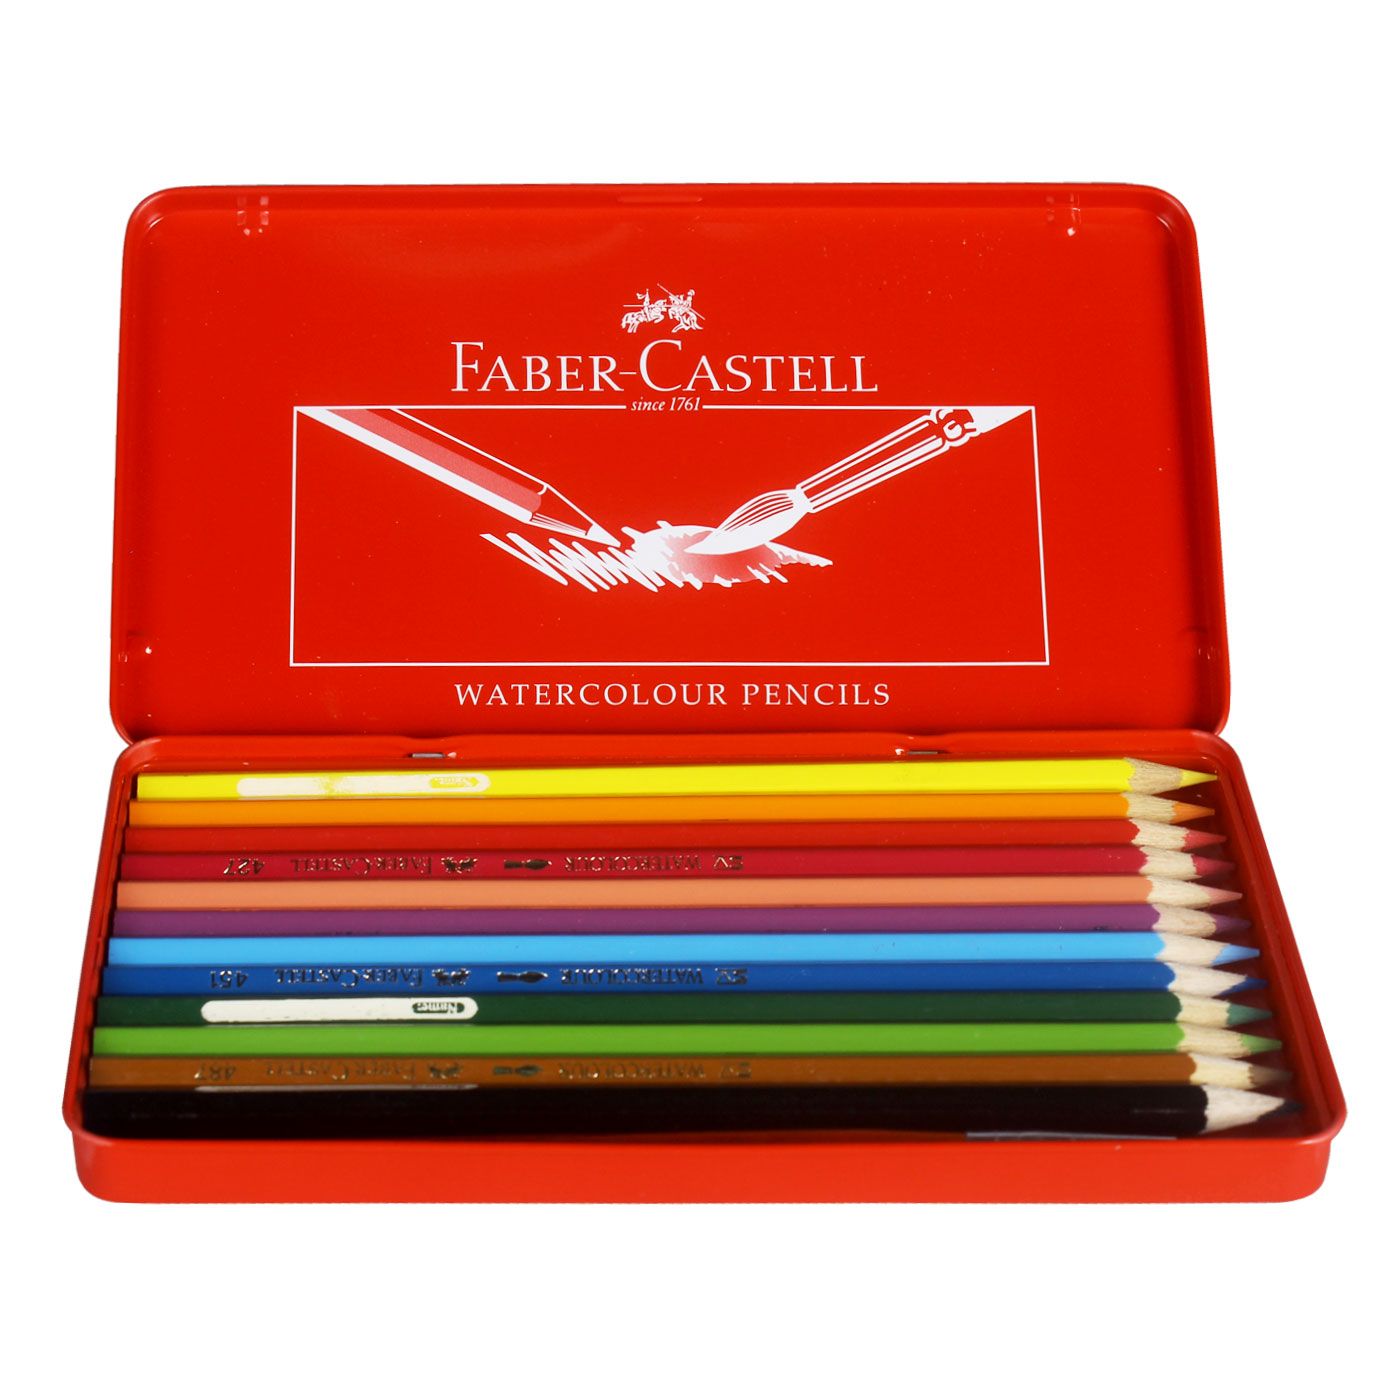 Faber Castell Watercolour Pencils in Tin Case (Isi 12) - 2